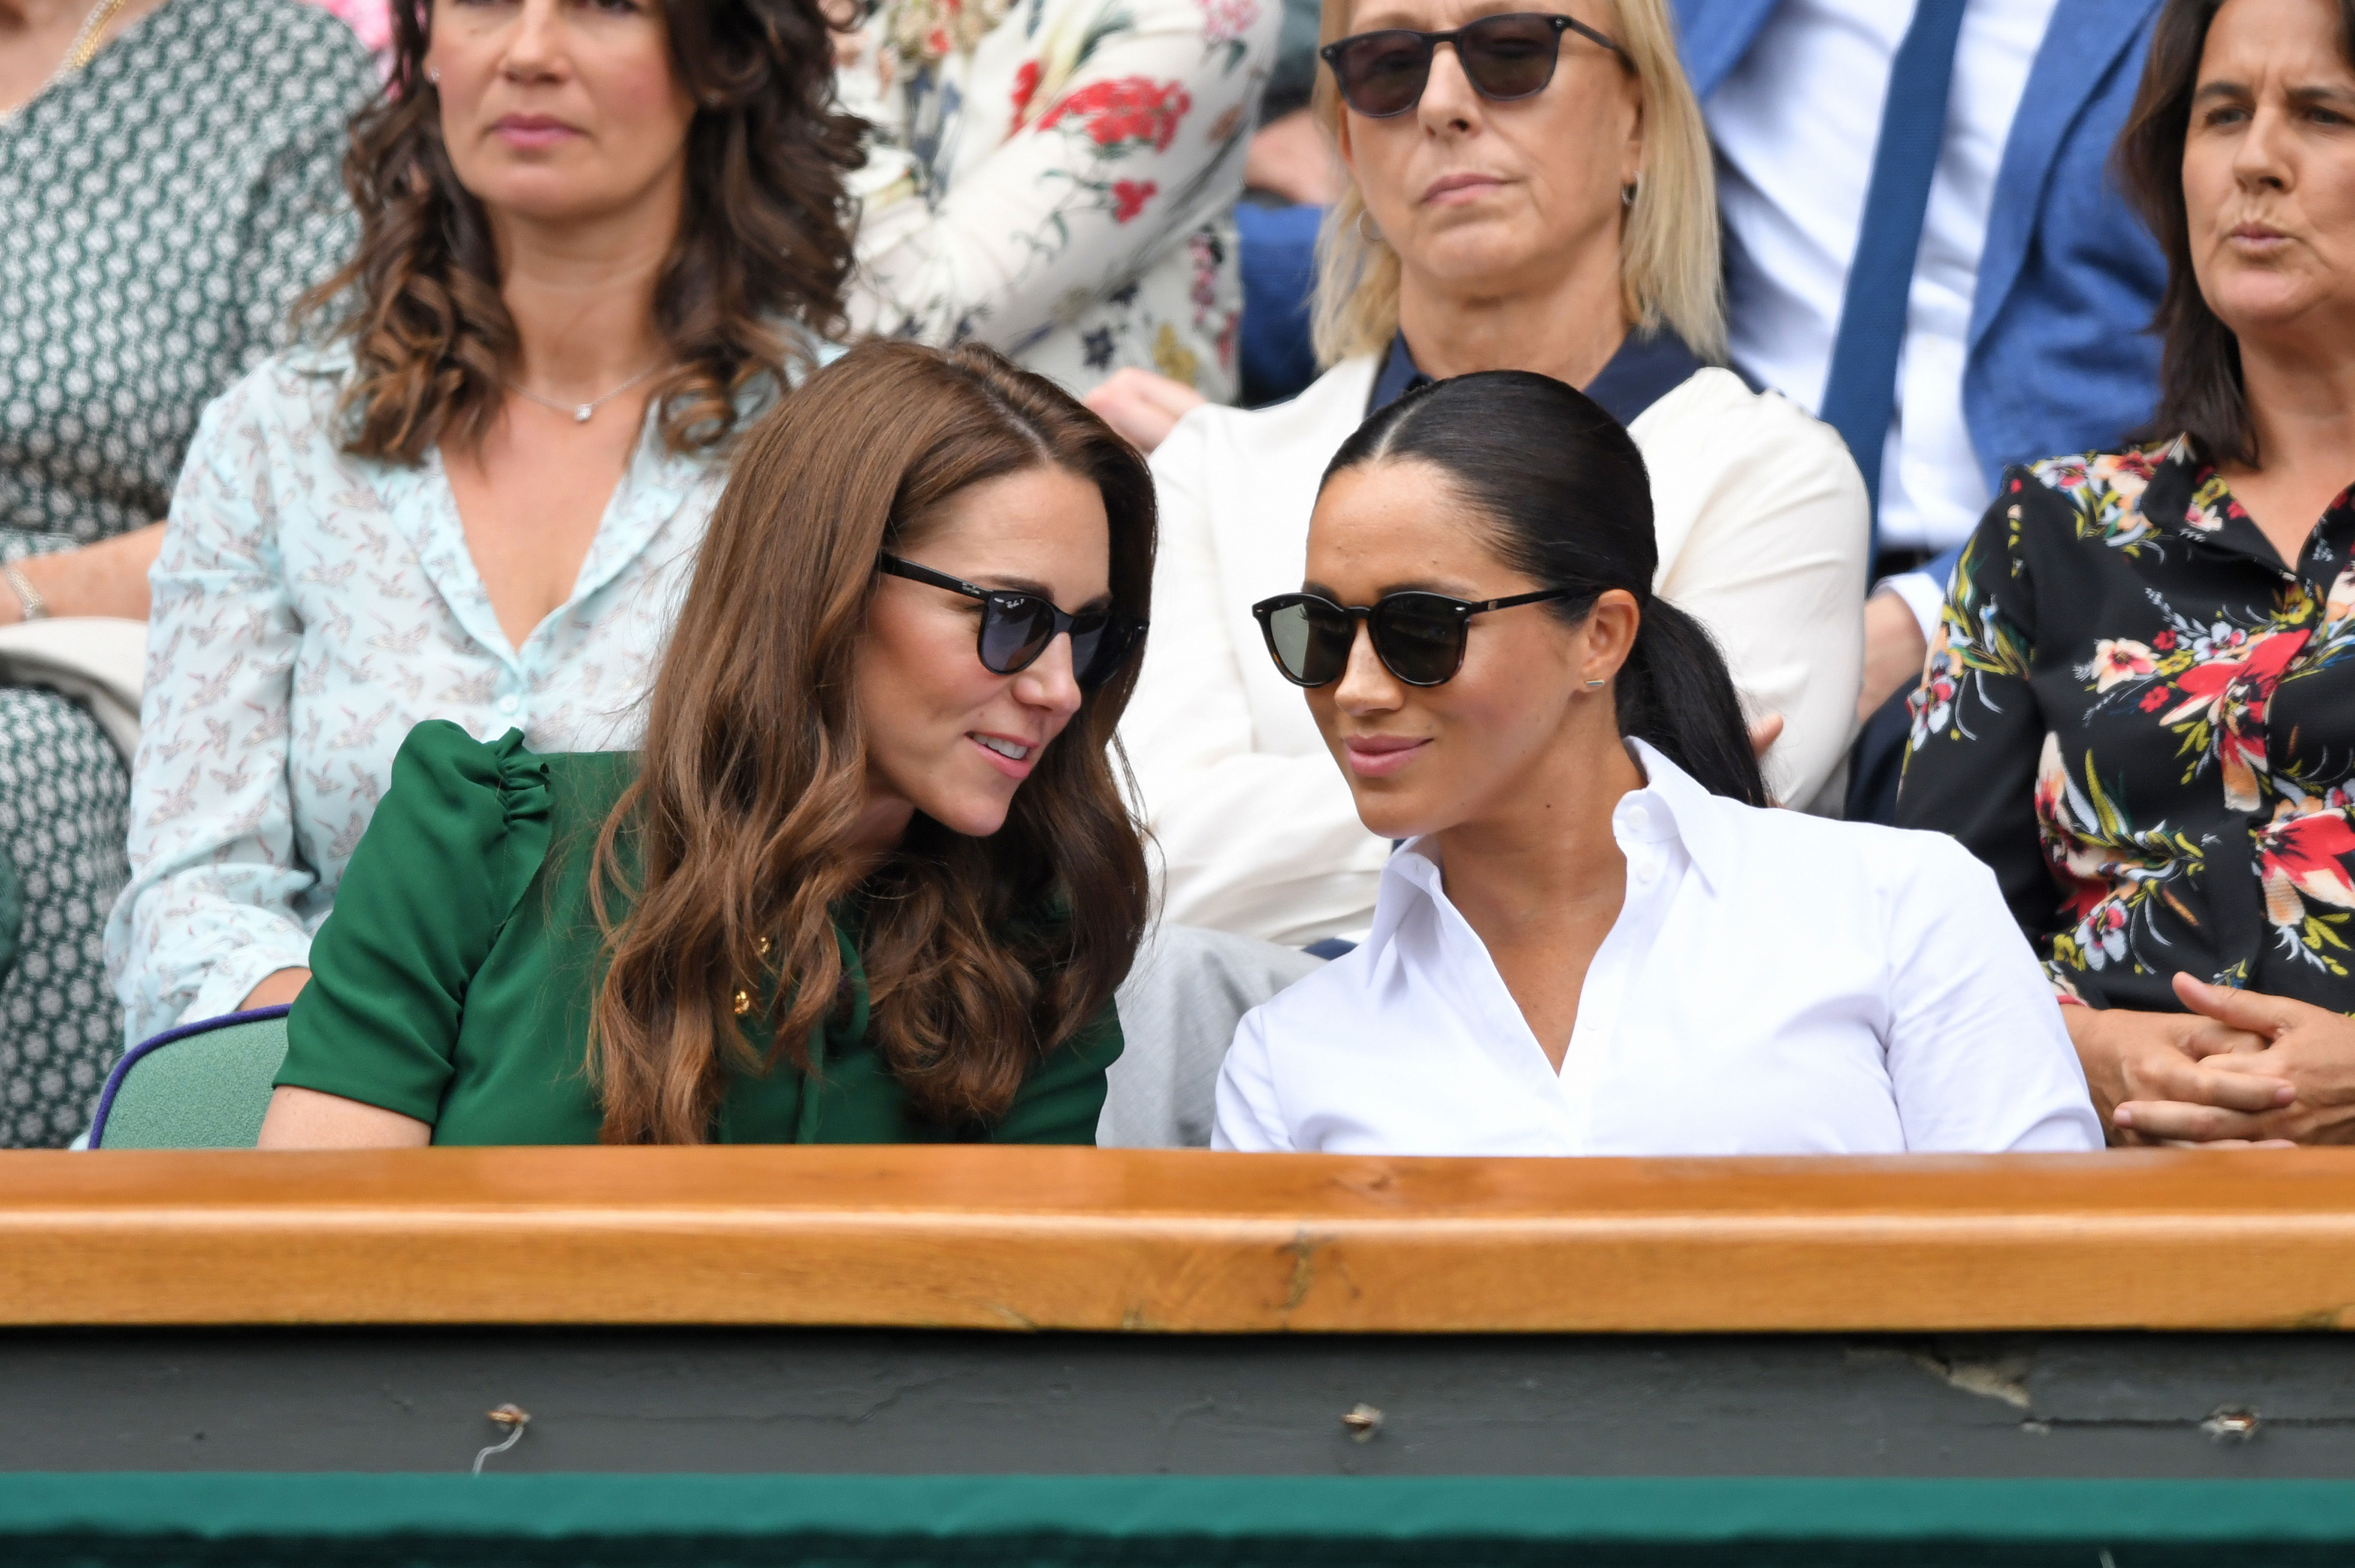 Catherine, Duchess of Cambridge, and Meghan, Duchess of Sussex, attend Wimbledon in London on July 13, 2019.